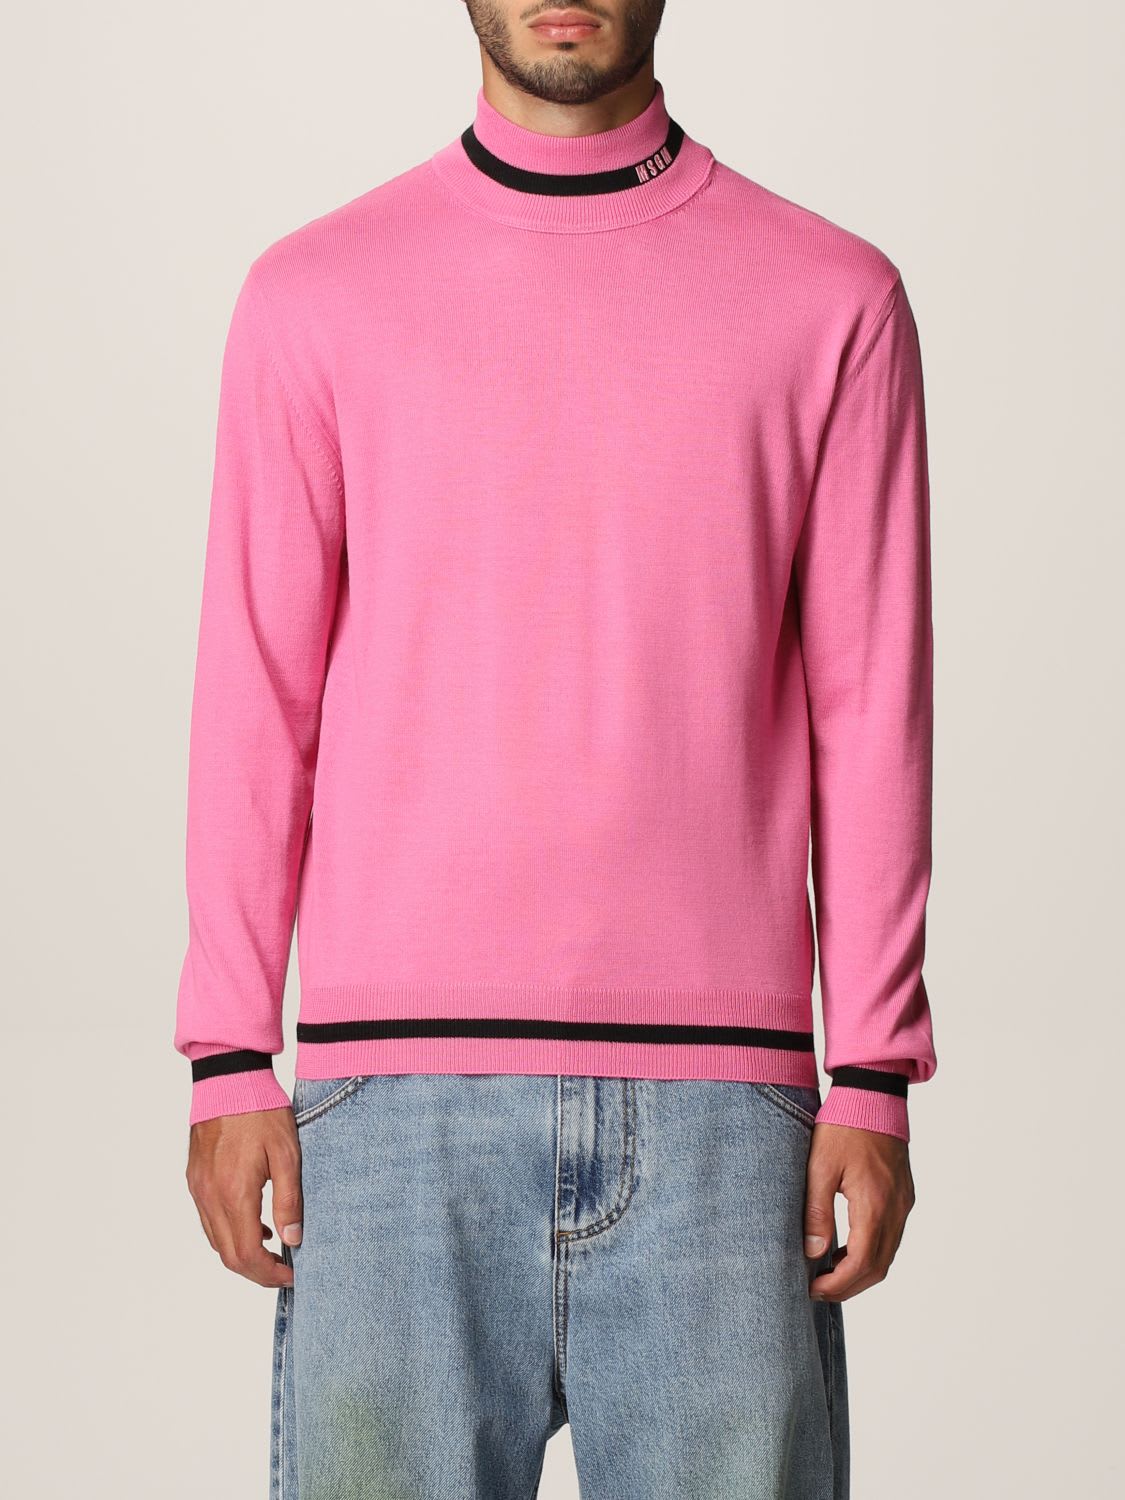 Msgm Sweater Msgm Turtleneck In Wool Blend With Jacquard Logo